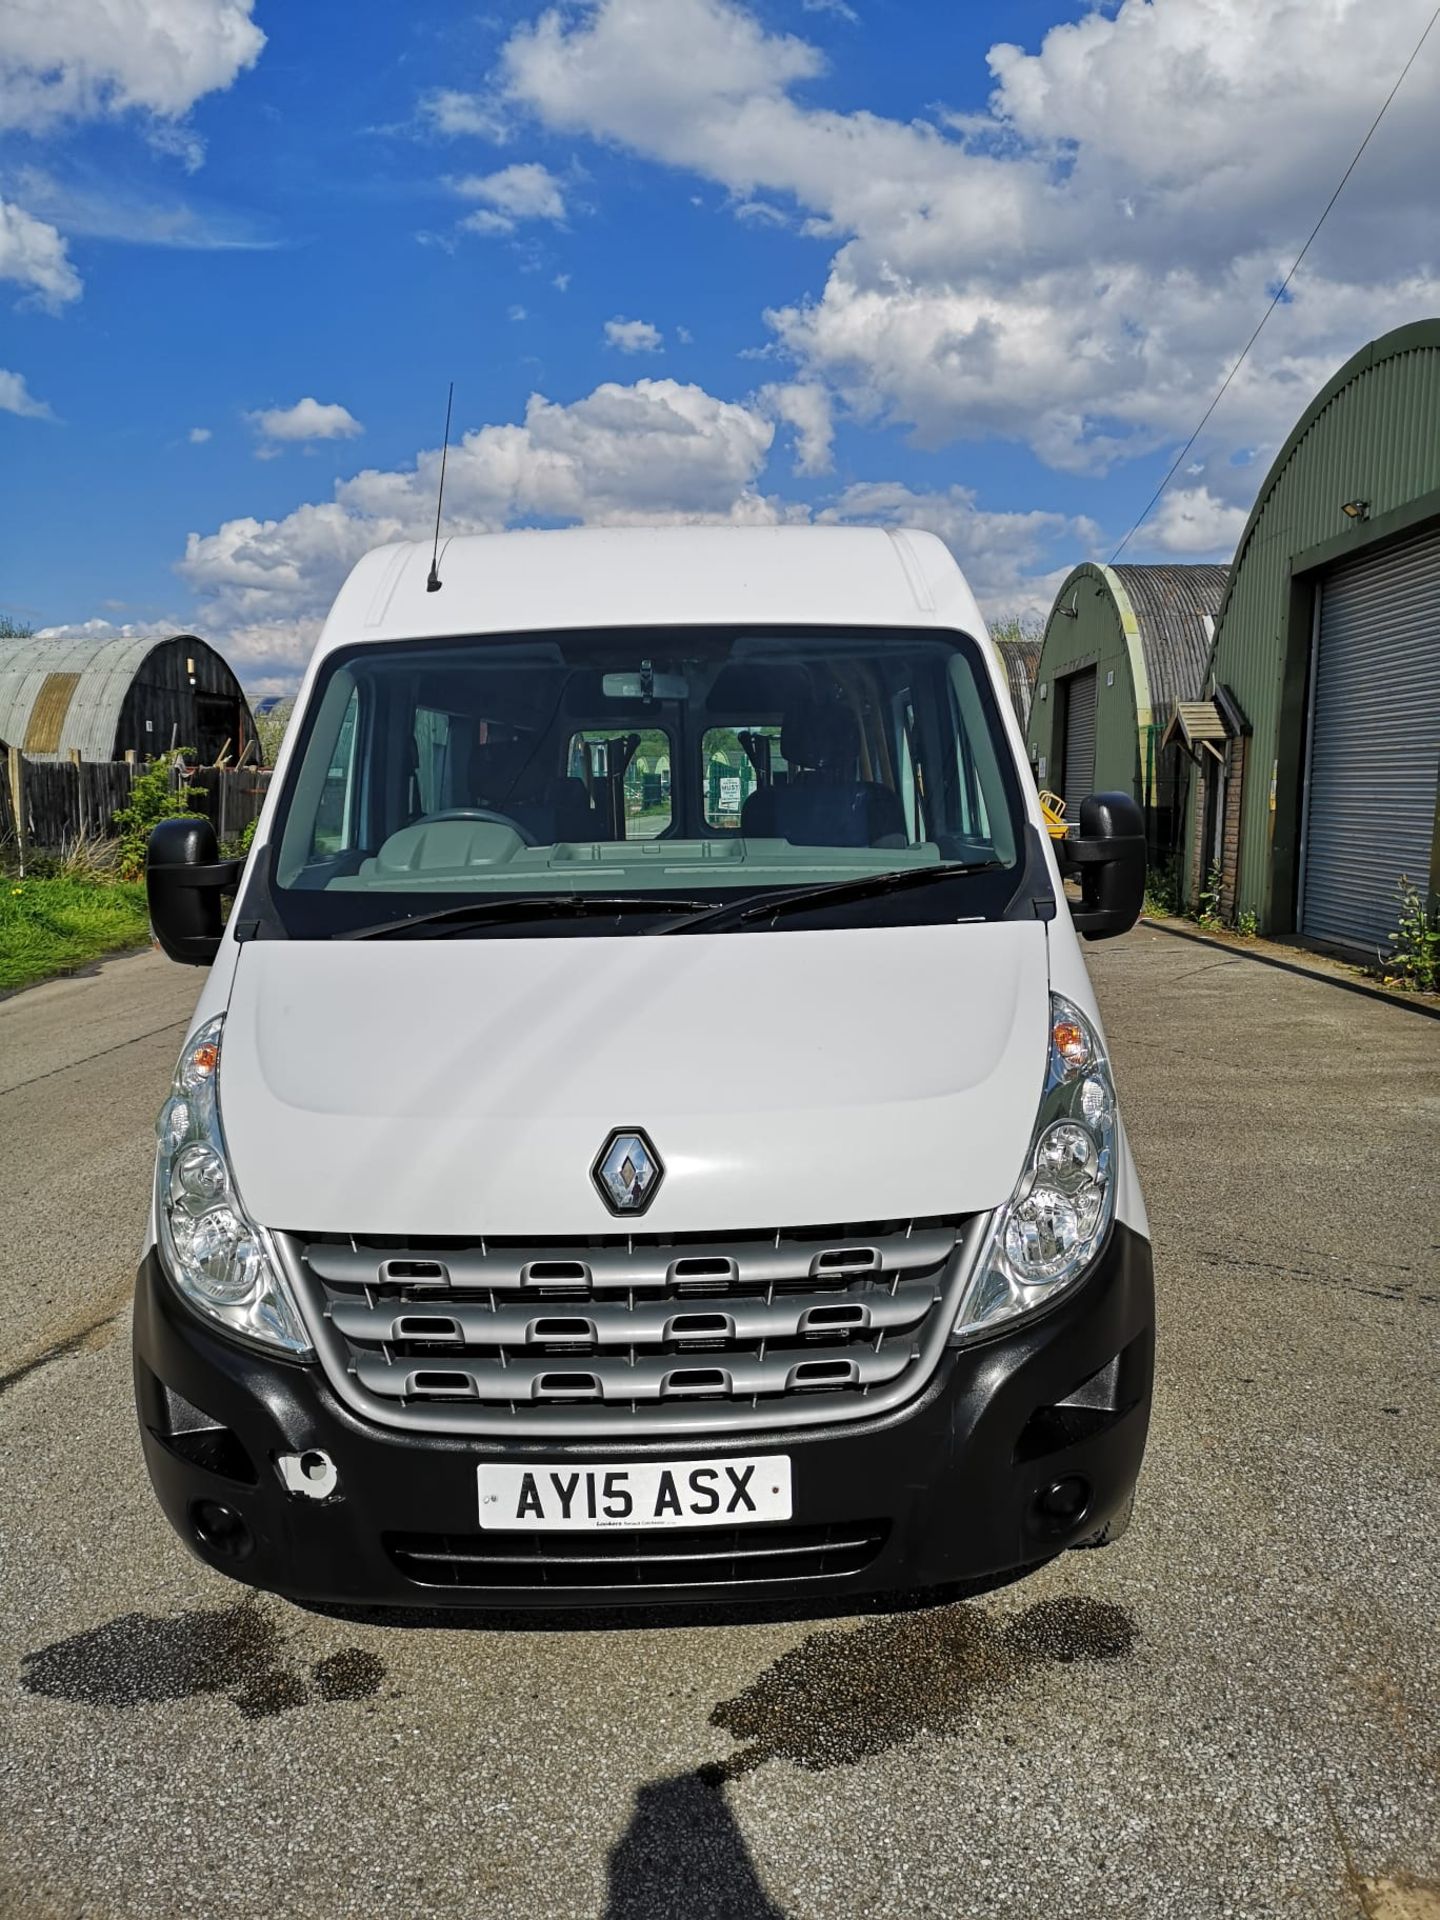 2015/15 REG RENAULT MASTER LM35 DCI 100 2.2 DIESEL MANUAL VAN WITH DISABLED RAMP REAR ACCESS *NO VAT - Image 2 of 20